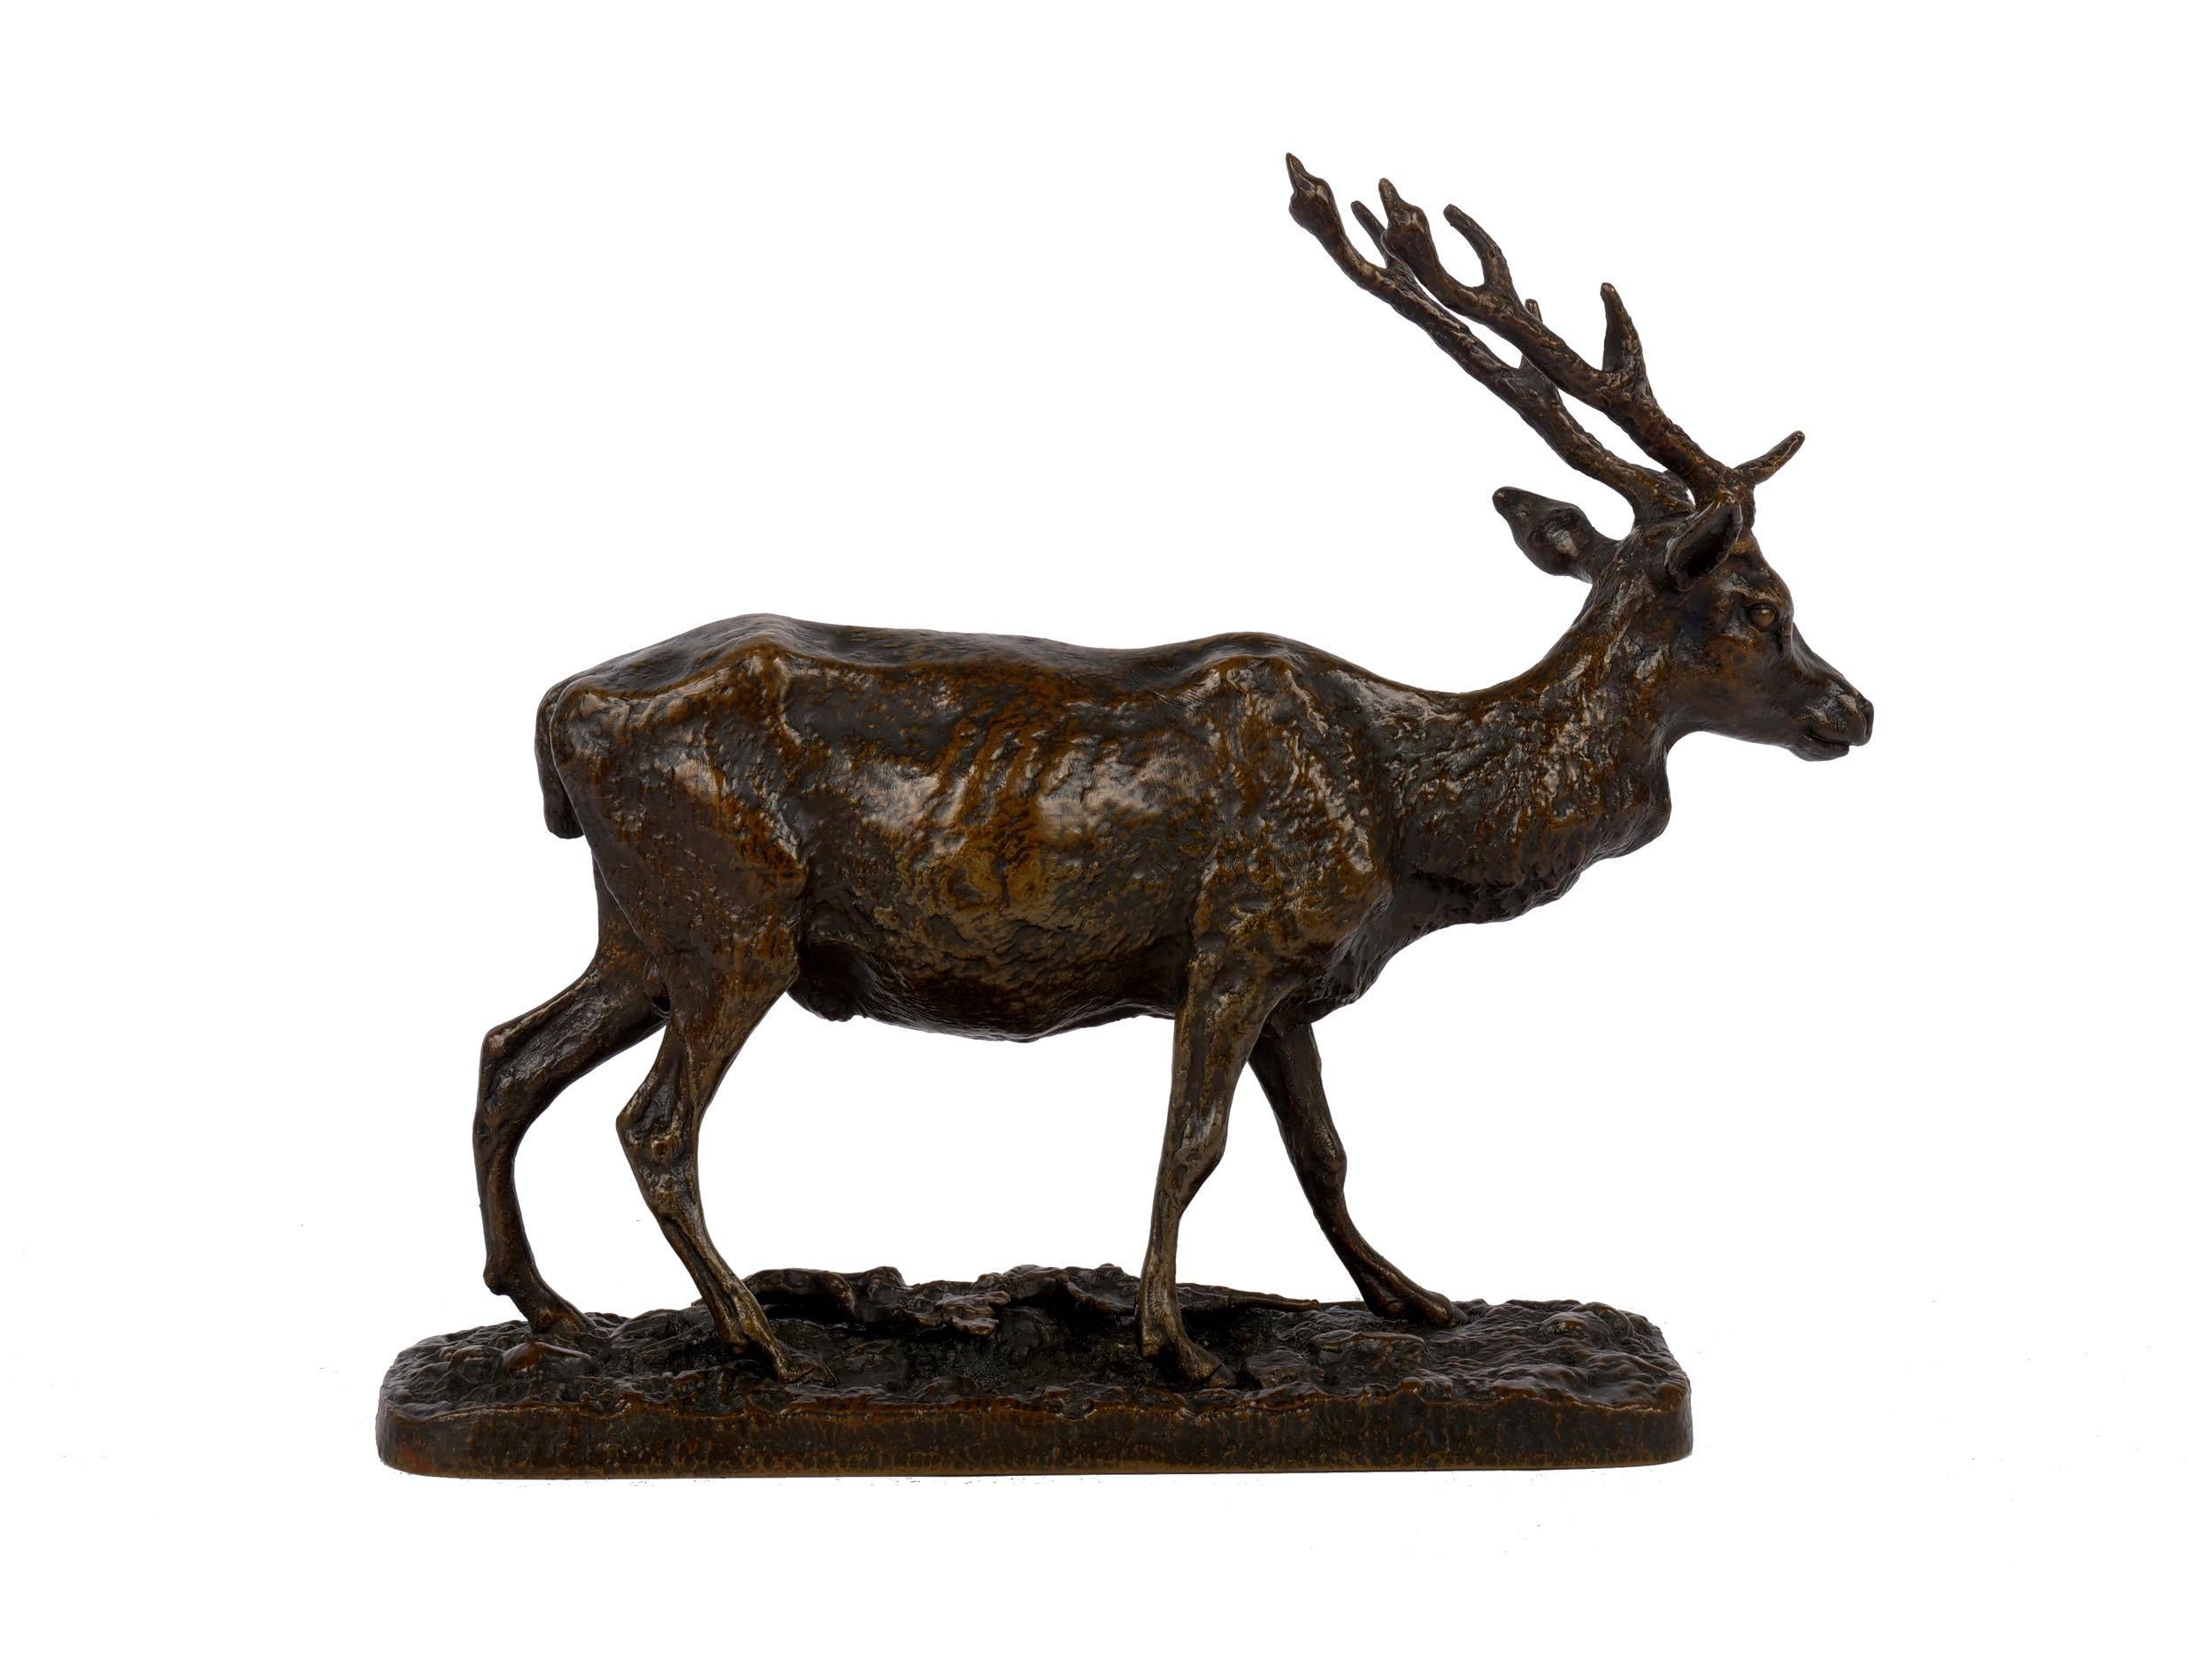 A rare and exquisite mid-19th century sand-cast model of a stag deer executed in Pierre-Jules Mêne's own atelier, it is a silky and finely detailed model with a reddish-brown oxide surface patina preserved under wax. The steady yet delicate